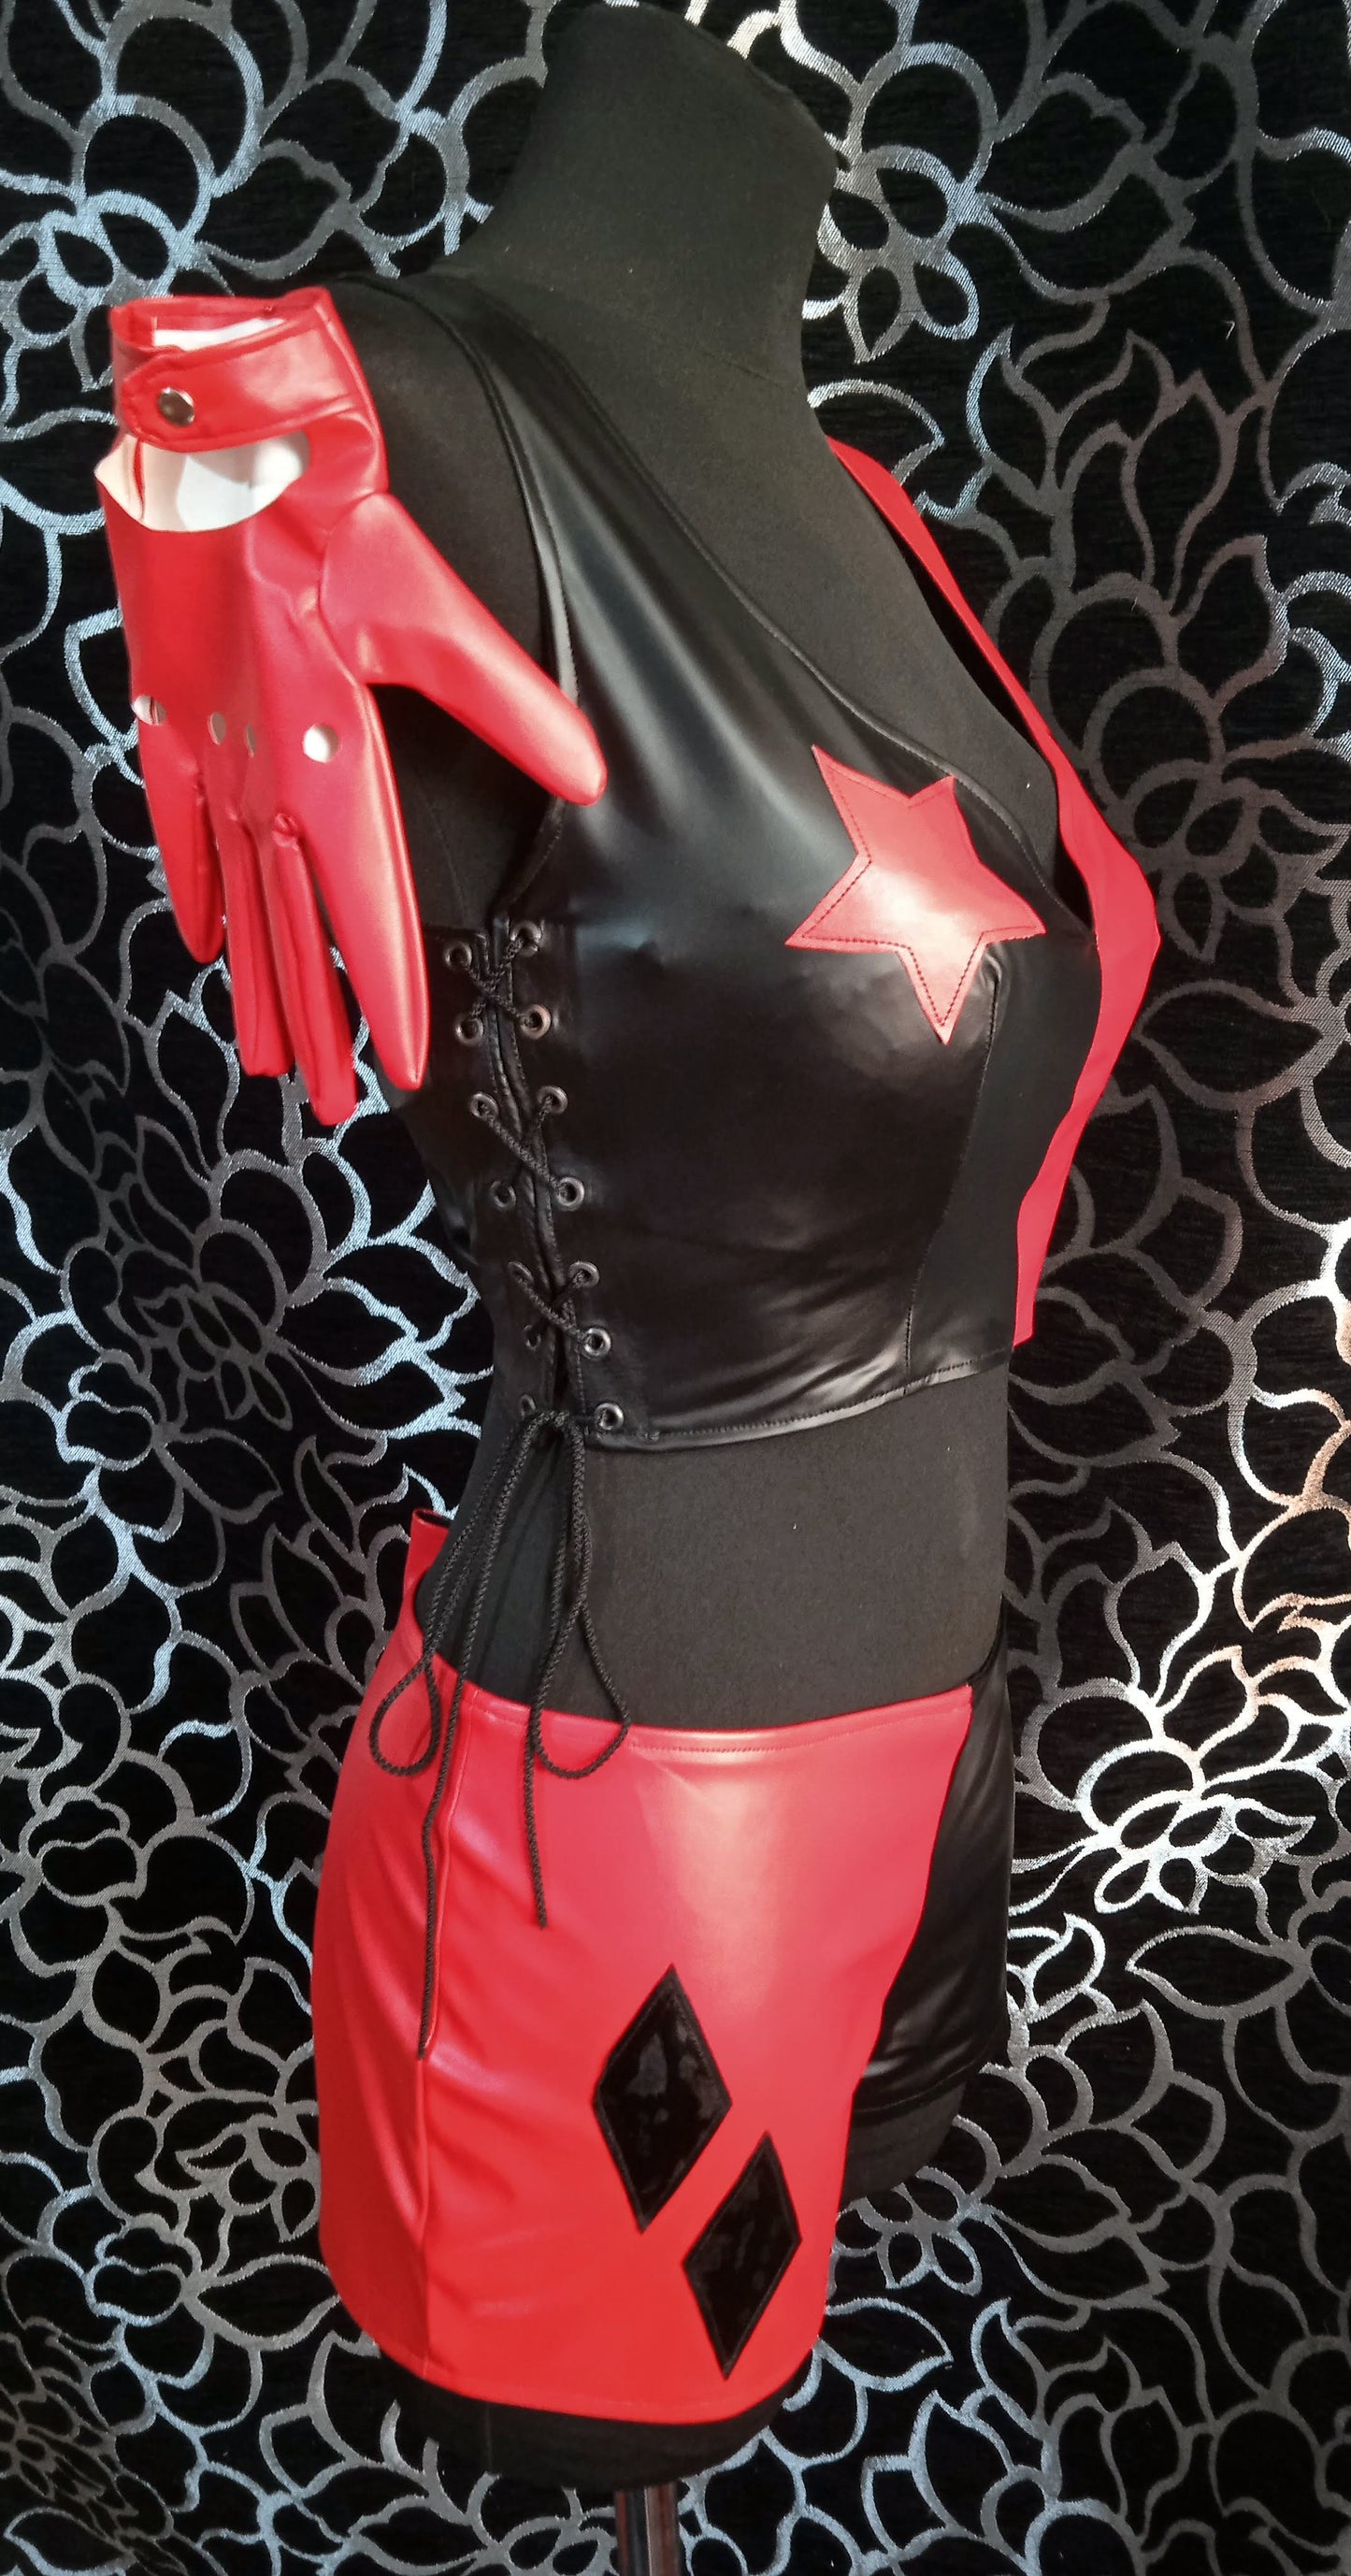 Harley Quinn Hand made leather outfit / comix outfit / super villain / Joker girlfriend cosplay